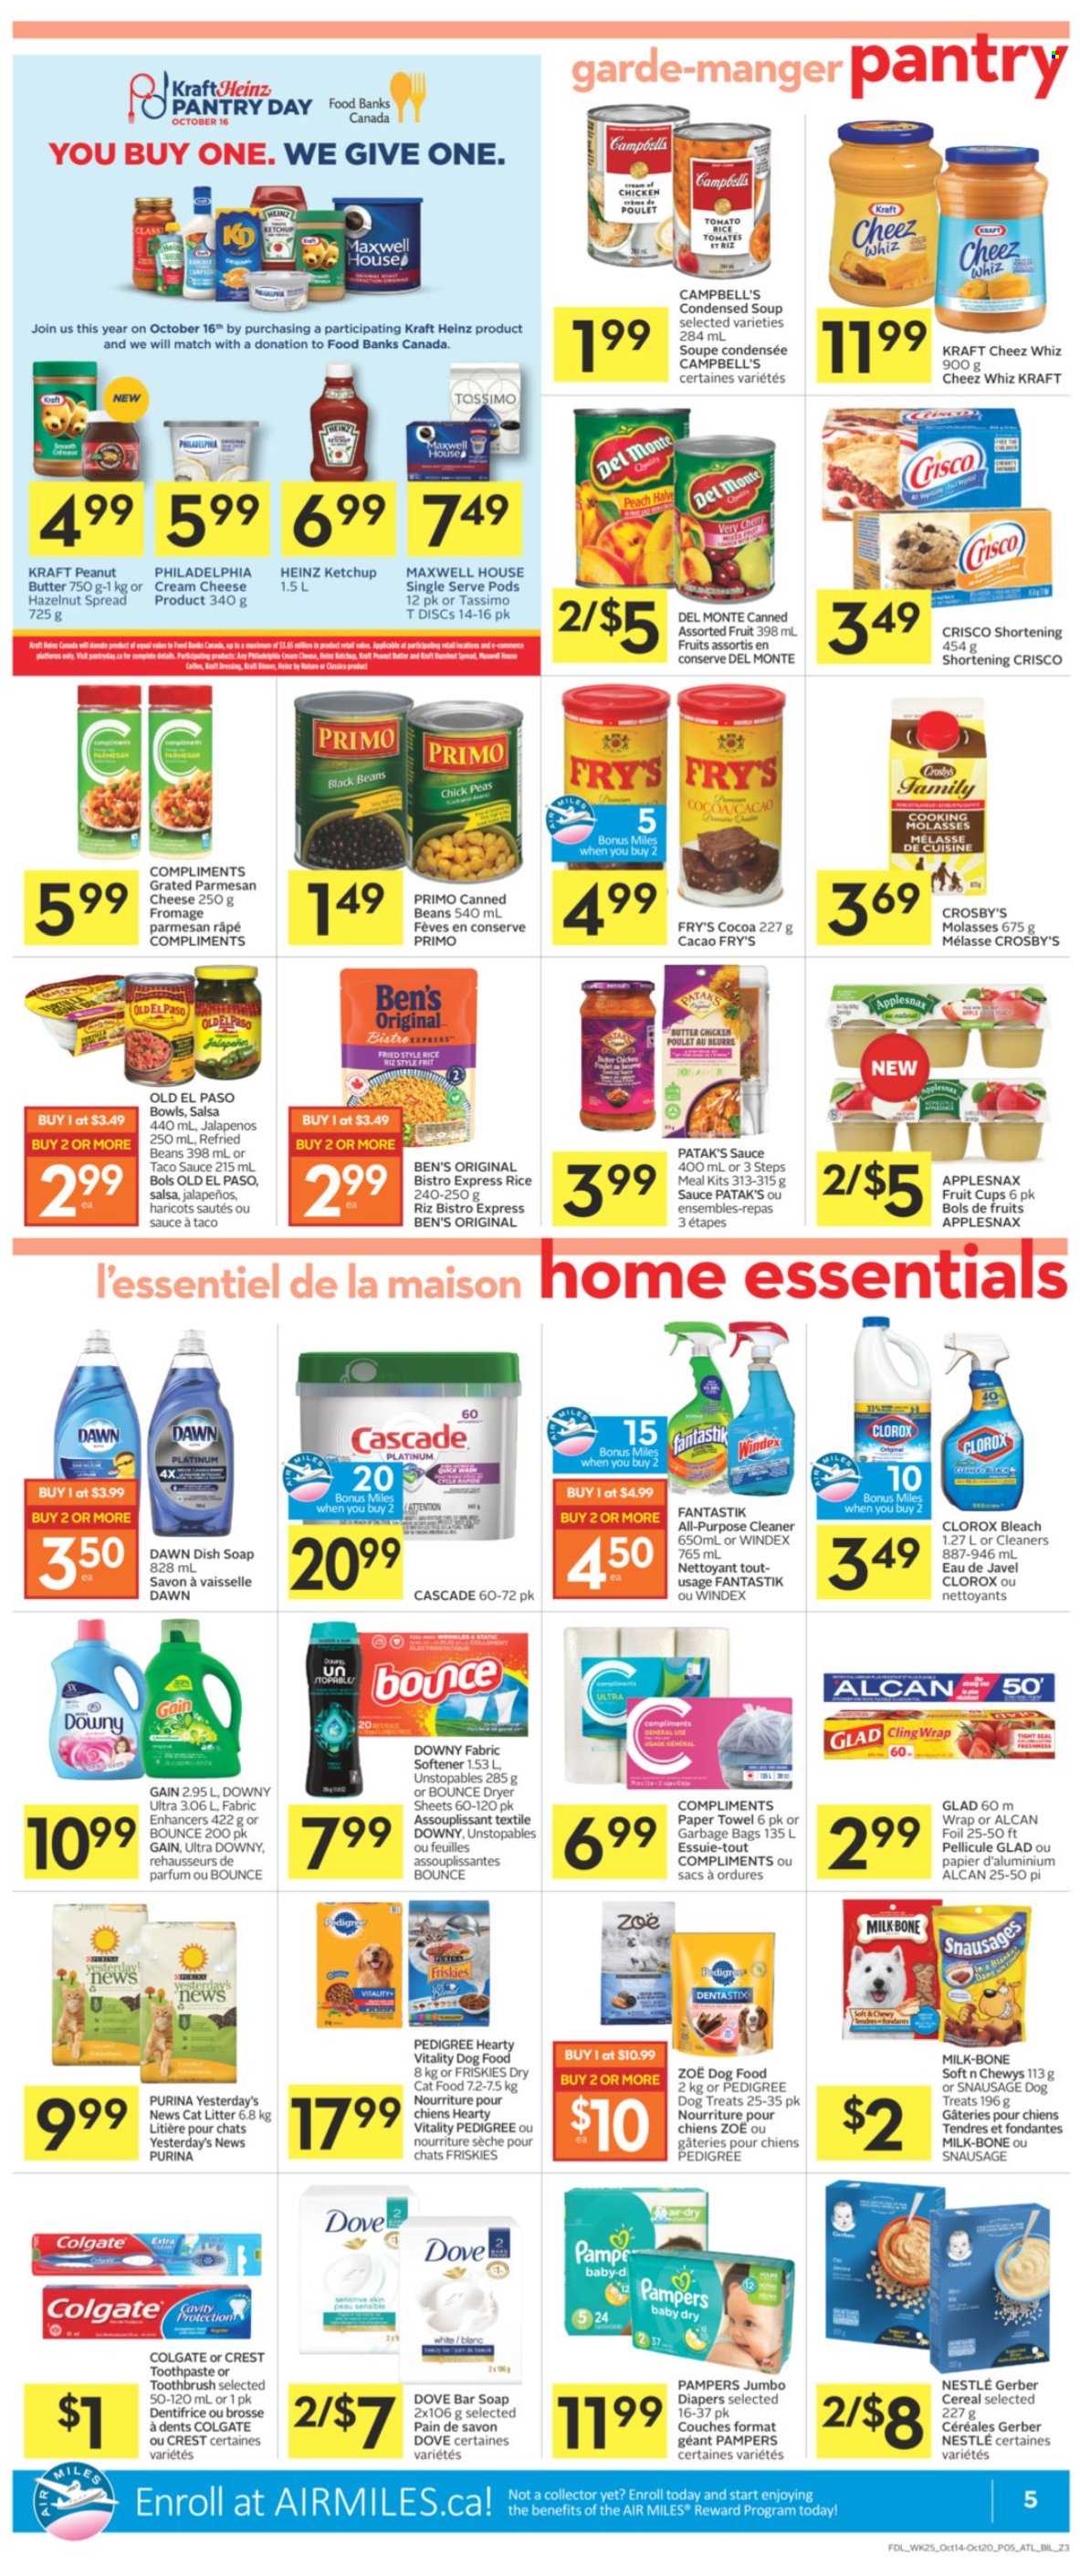 thumbnail - Co-op Flyer - October 14, 2021 - October 20, 2021 - Sales products - Old El Paso, beans, peas, fruit cup, Campbell's, condensed soup, soup, sauce, instant soup, Kraft®, parmesan, cheese, milk, butter, Gerber, cocoa, Crisco, shortening, black beans, refried beans, Heinz, cereals, rice, taco sauce, salsa, molasses, hazelnut spread, Maxwell House, Nestlé, Dove, Colgate, ketchup, Philadelphia, Pampers. Page 7.